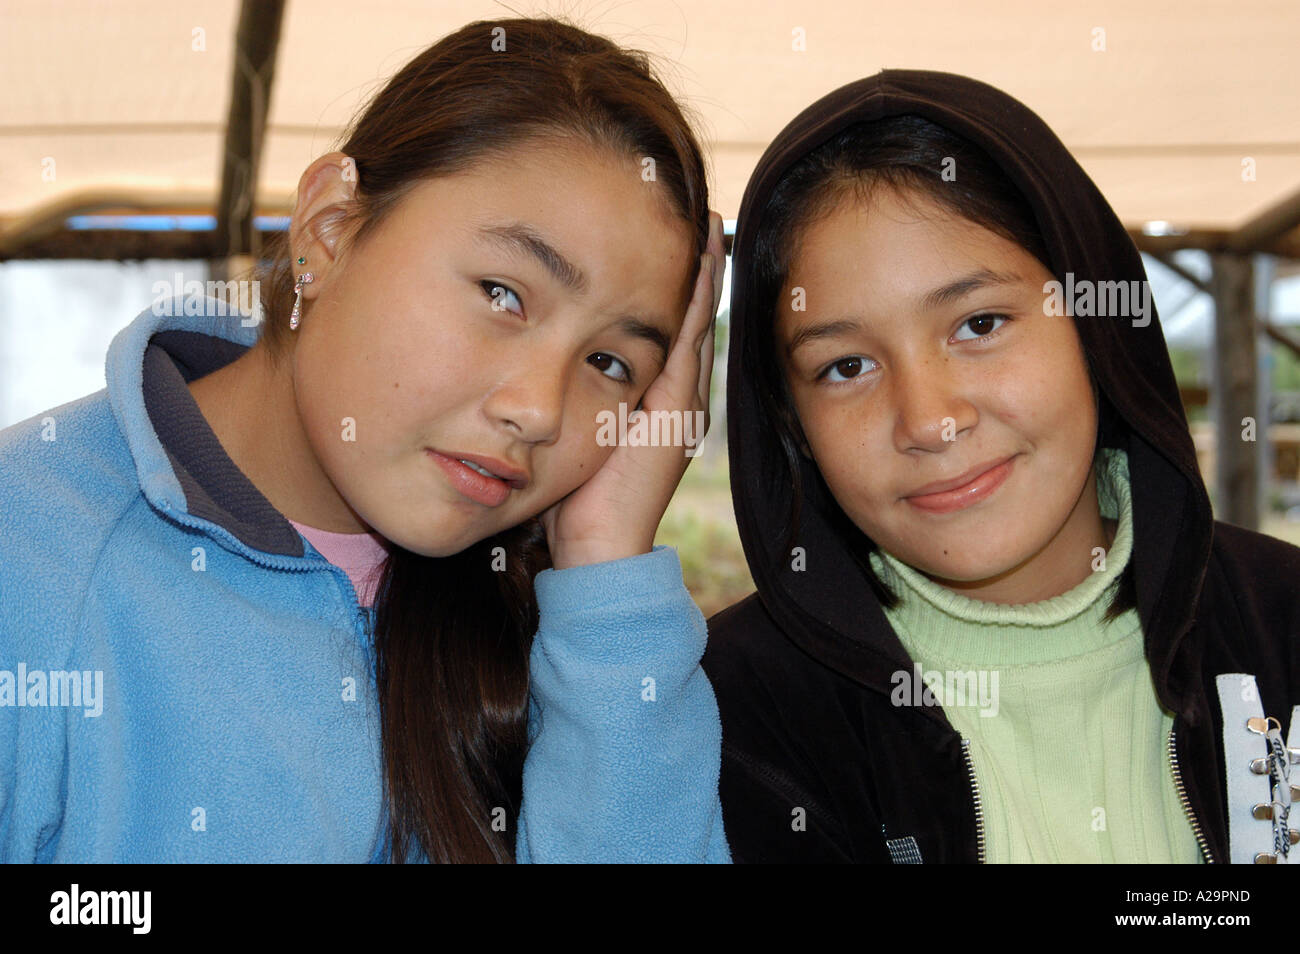 Native Cree Girls Northern Quebec Canada Stock Phot